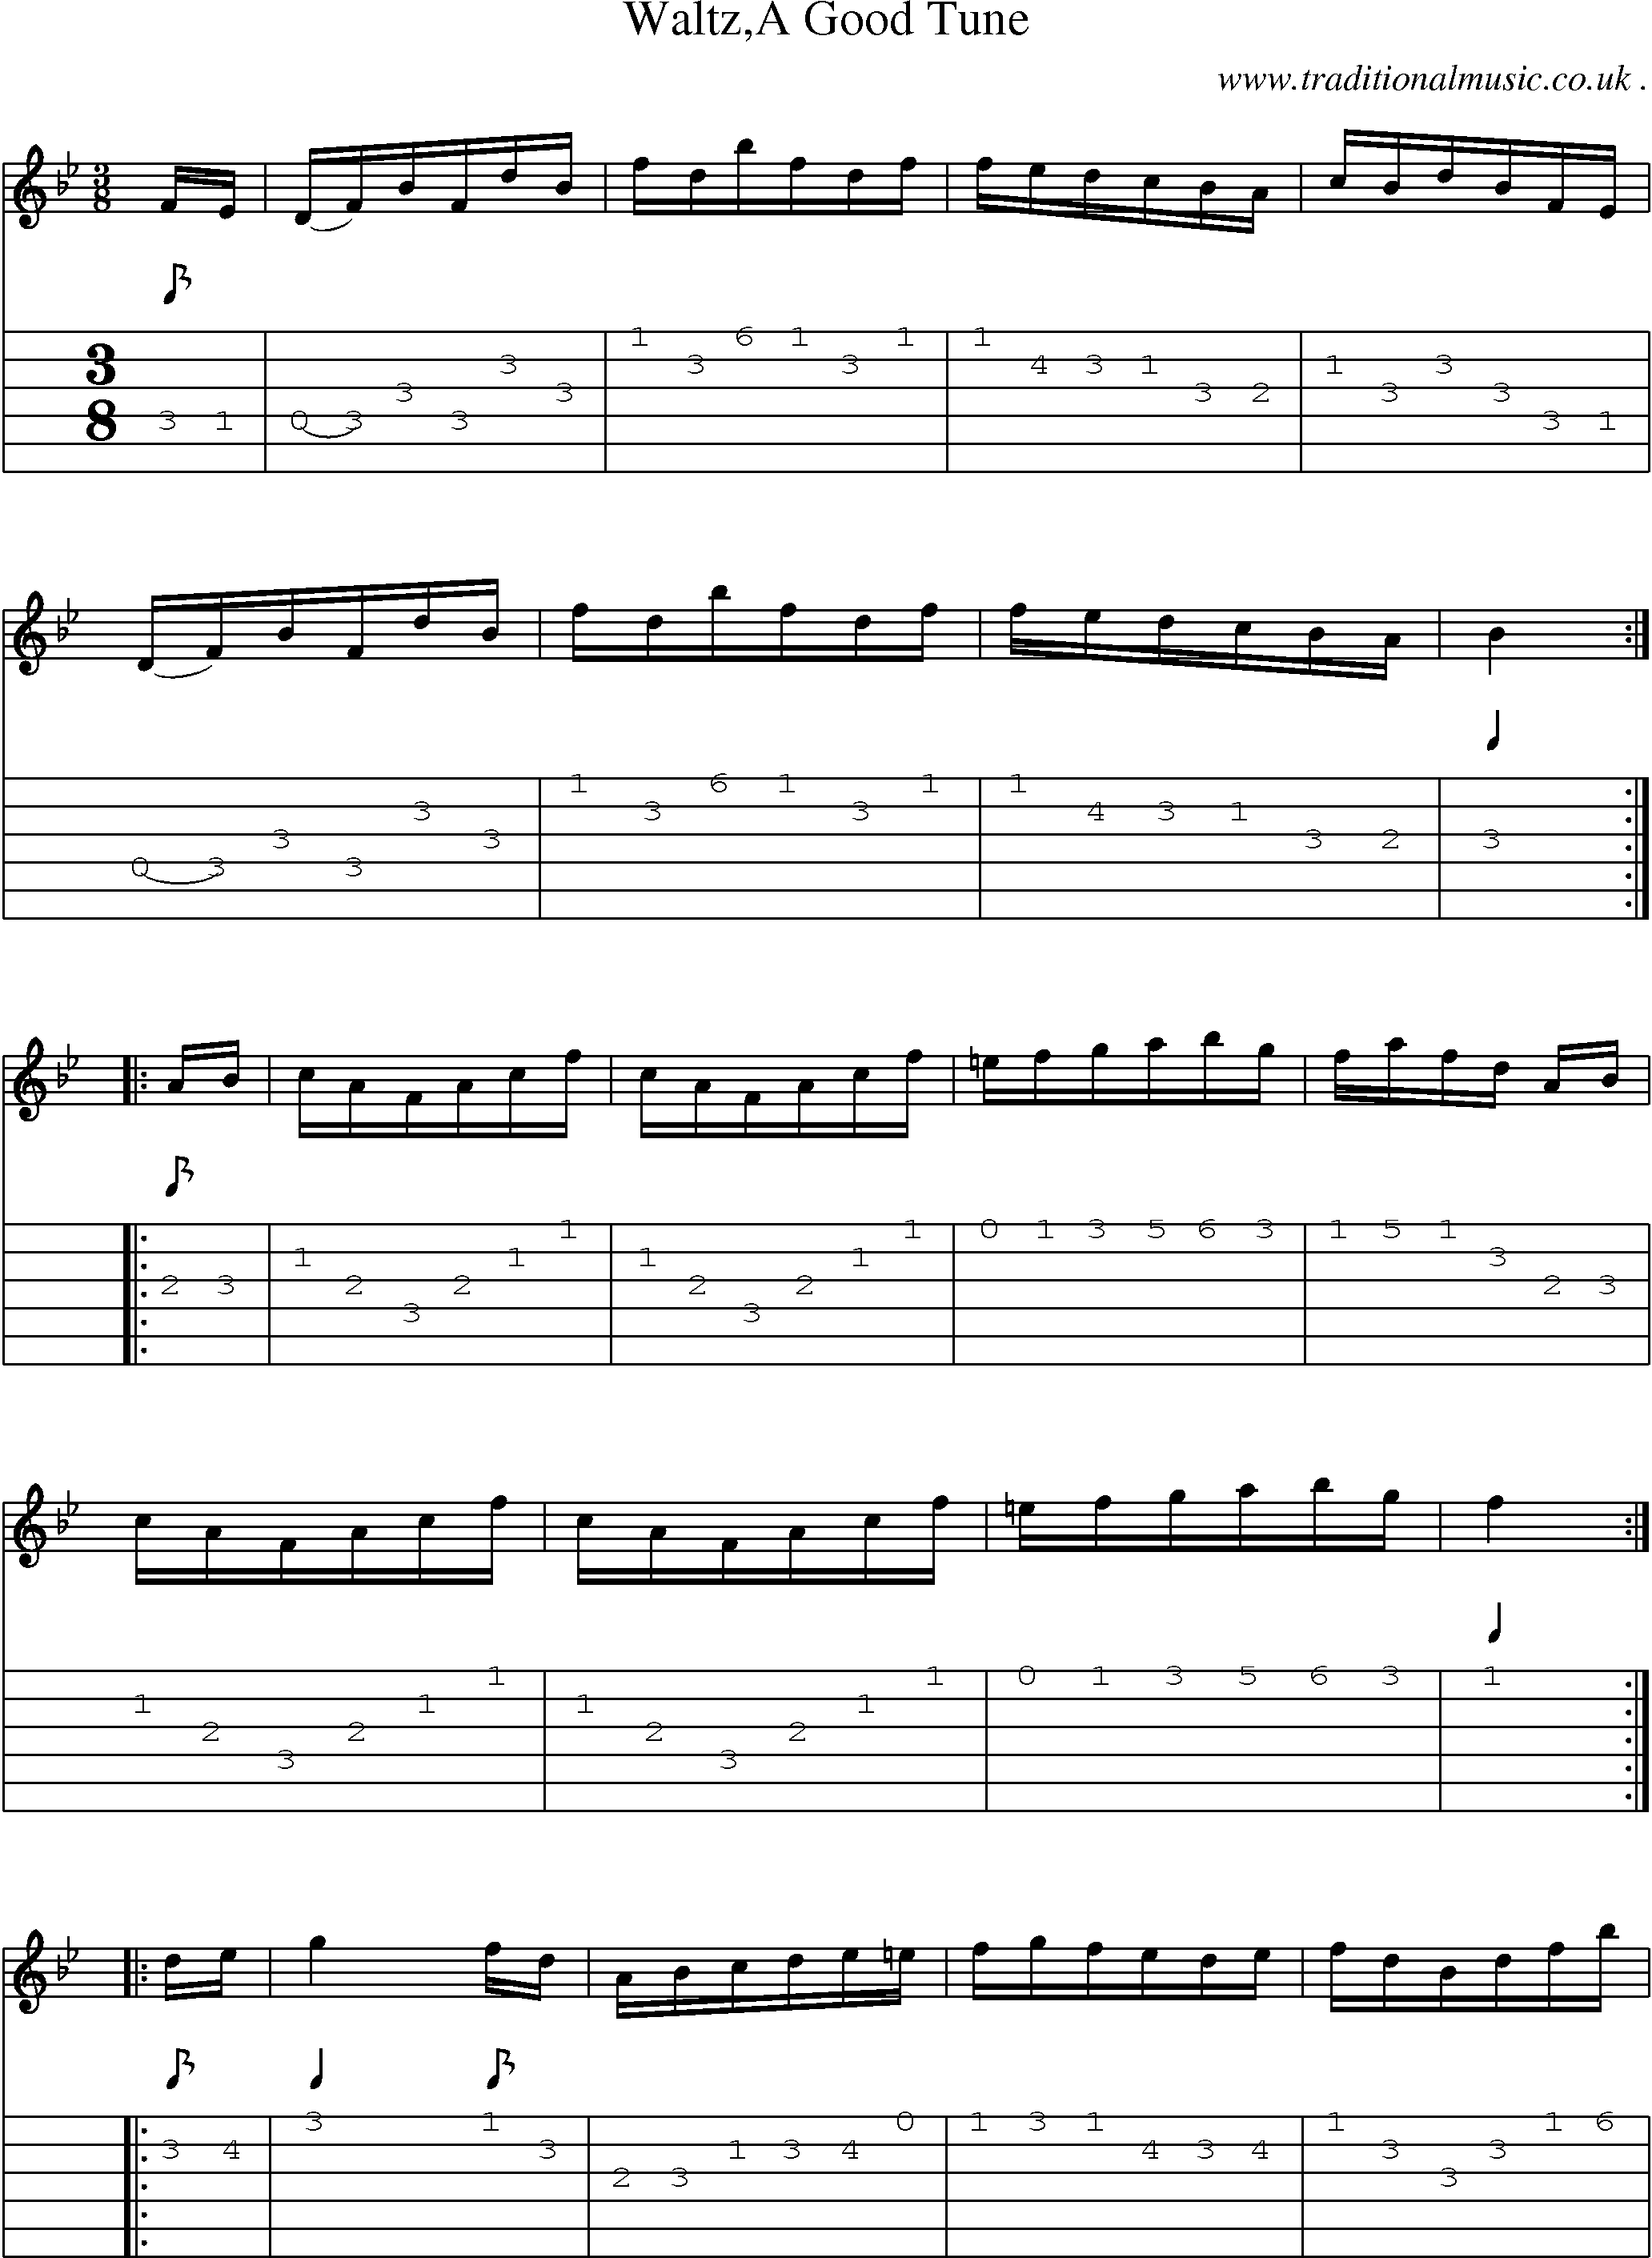 Sheet-Music and Guitar Tabs for Waltza Good Tune